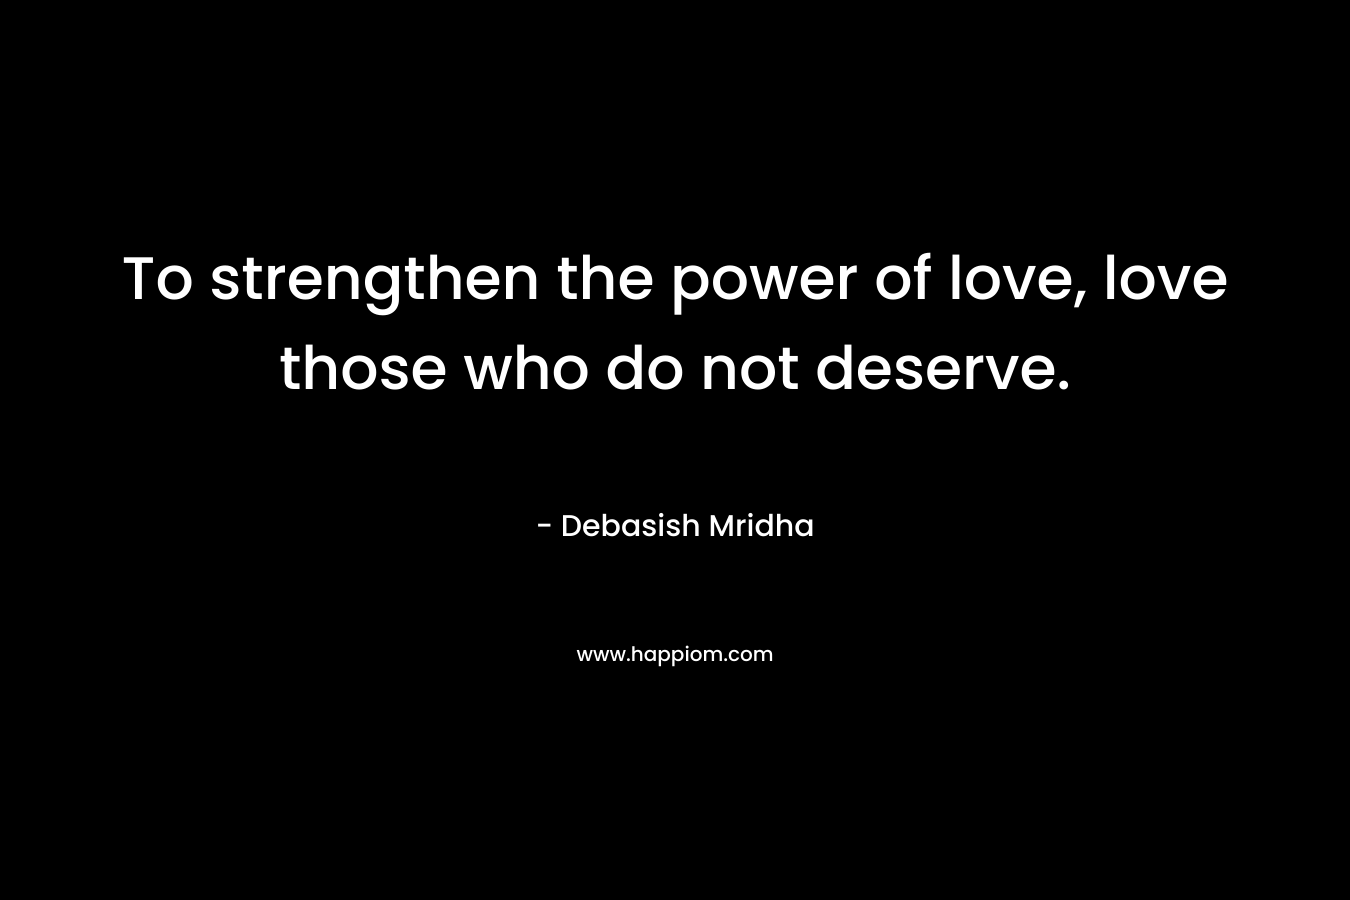 To strengthen the power of love, love those who do not deserve.